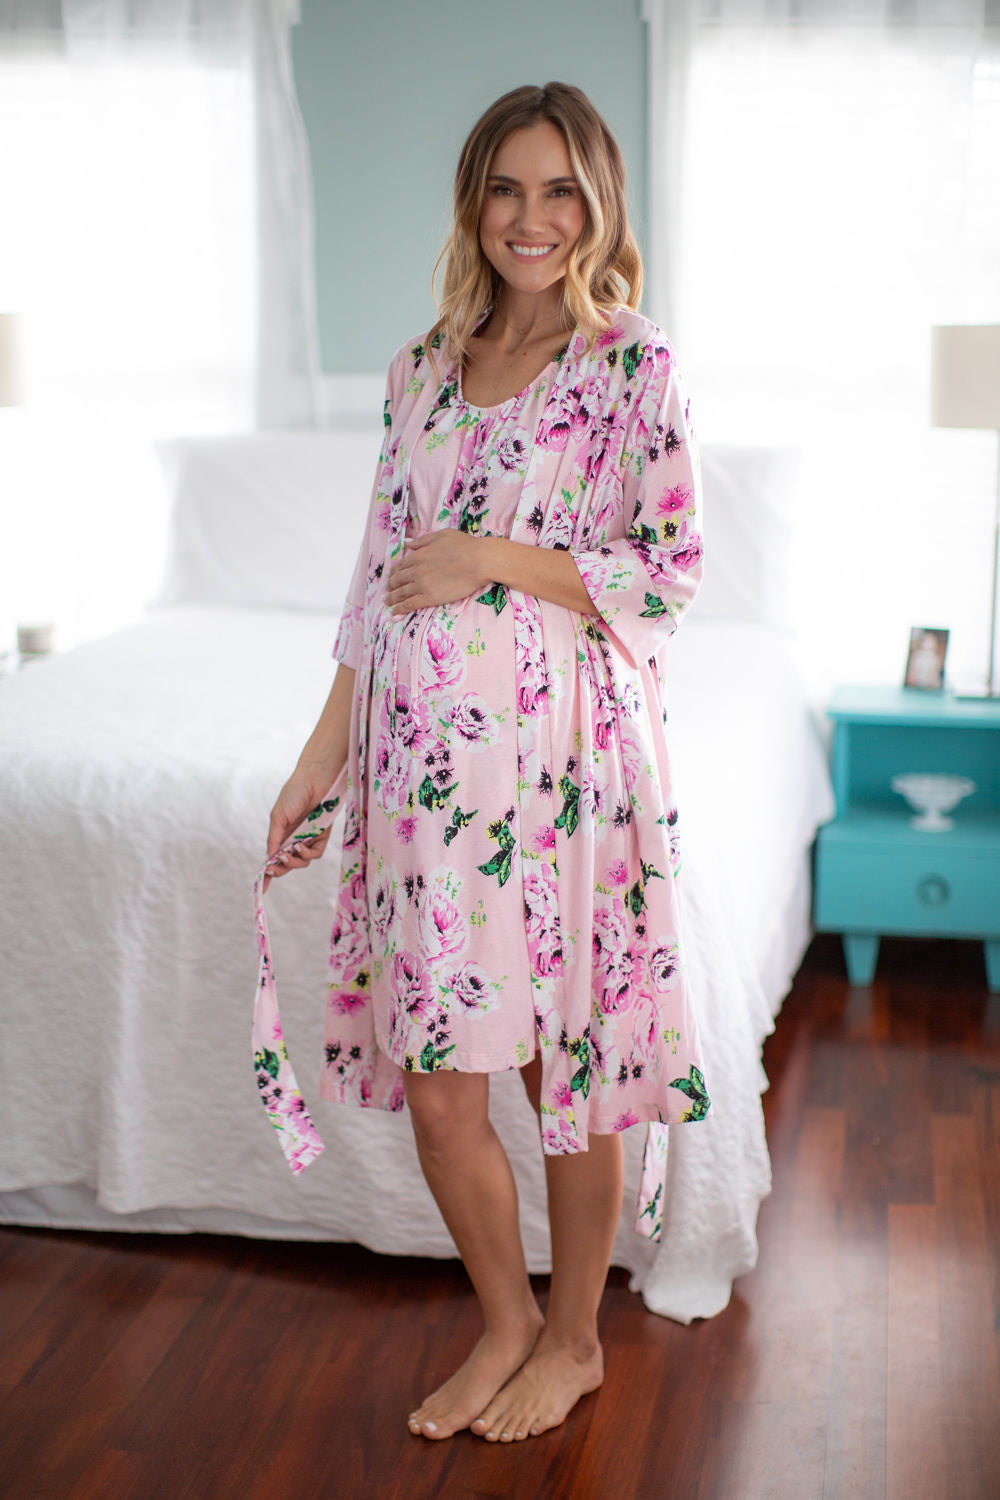 Labor Delivery Gown